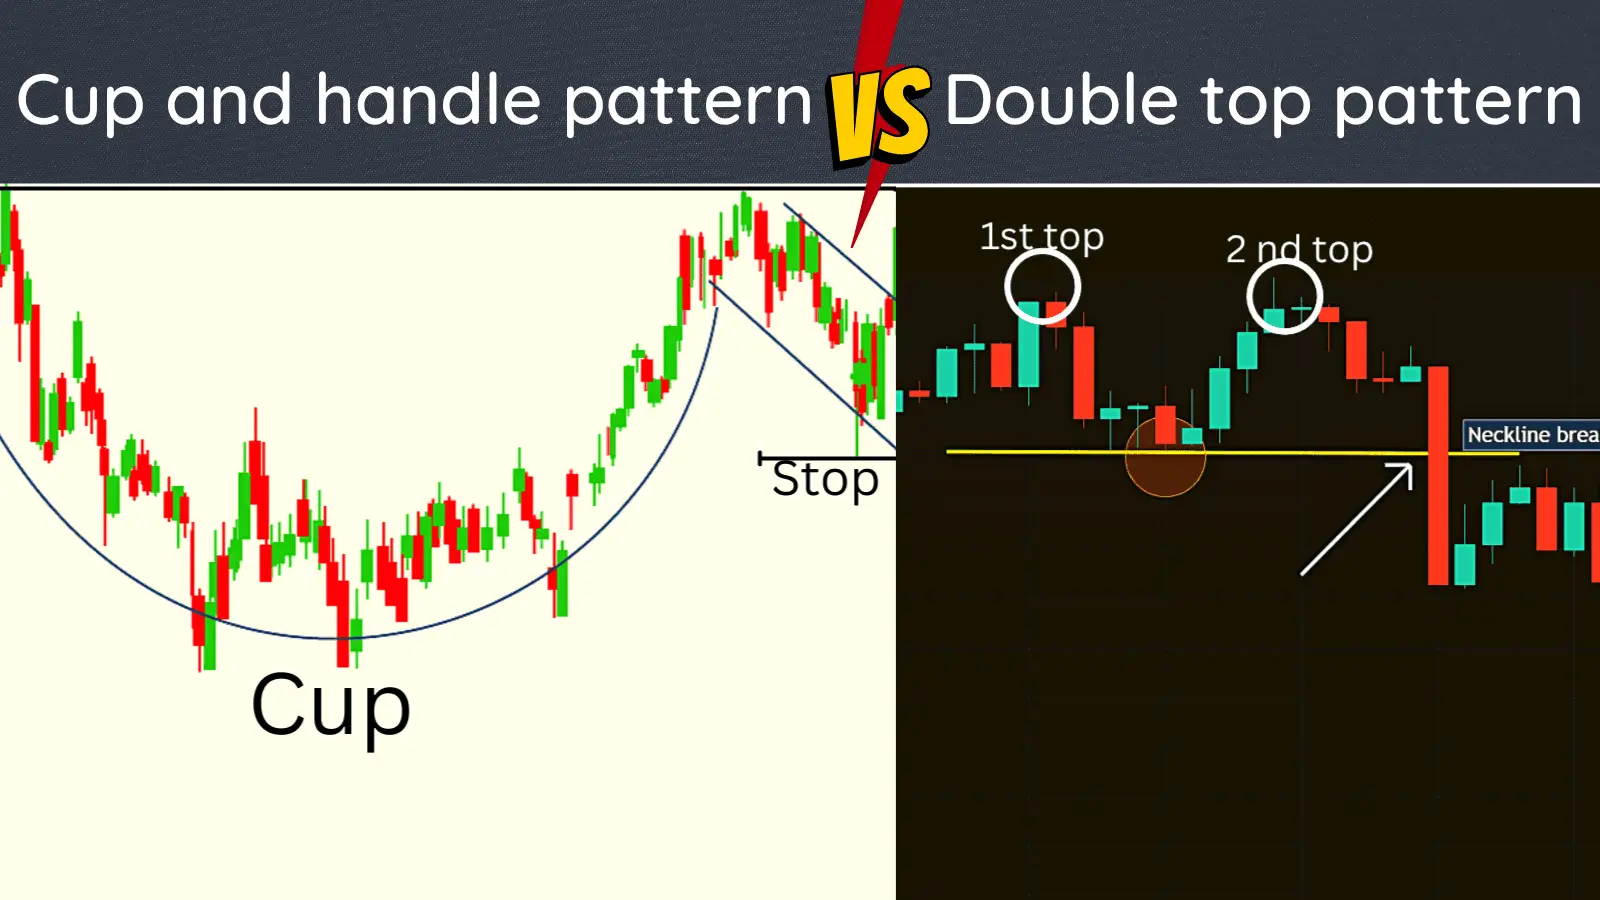 Cup and handle pattern vs Double top pattern